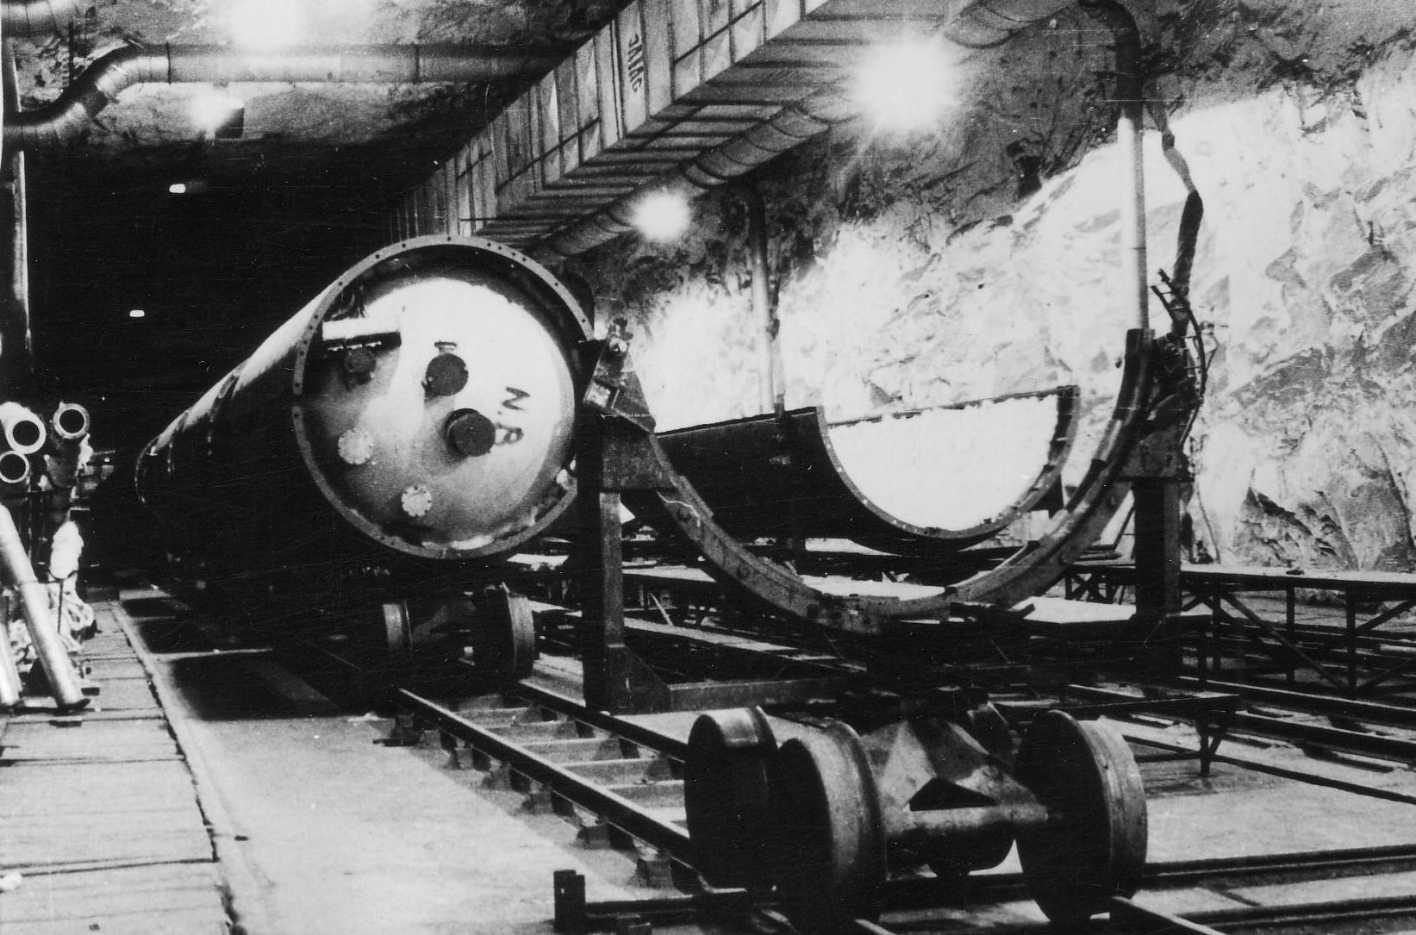 A partially assembled A4(V2) rocket on a trolley on rails in one of the Mittelwerk tunnels.